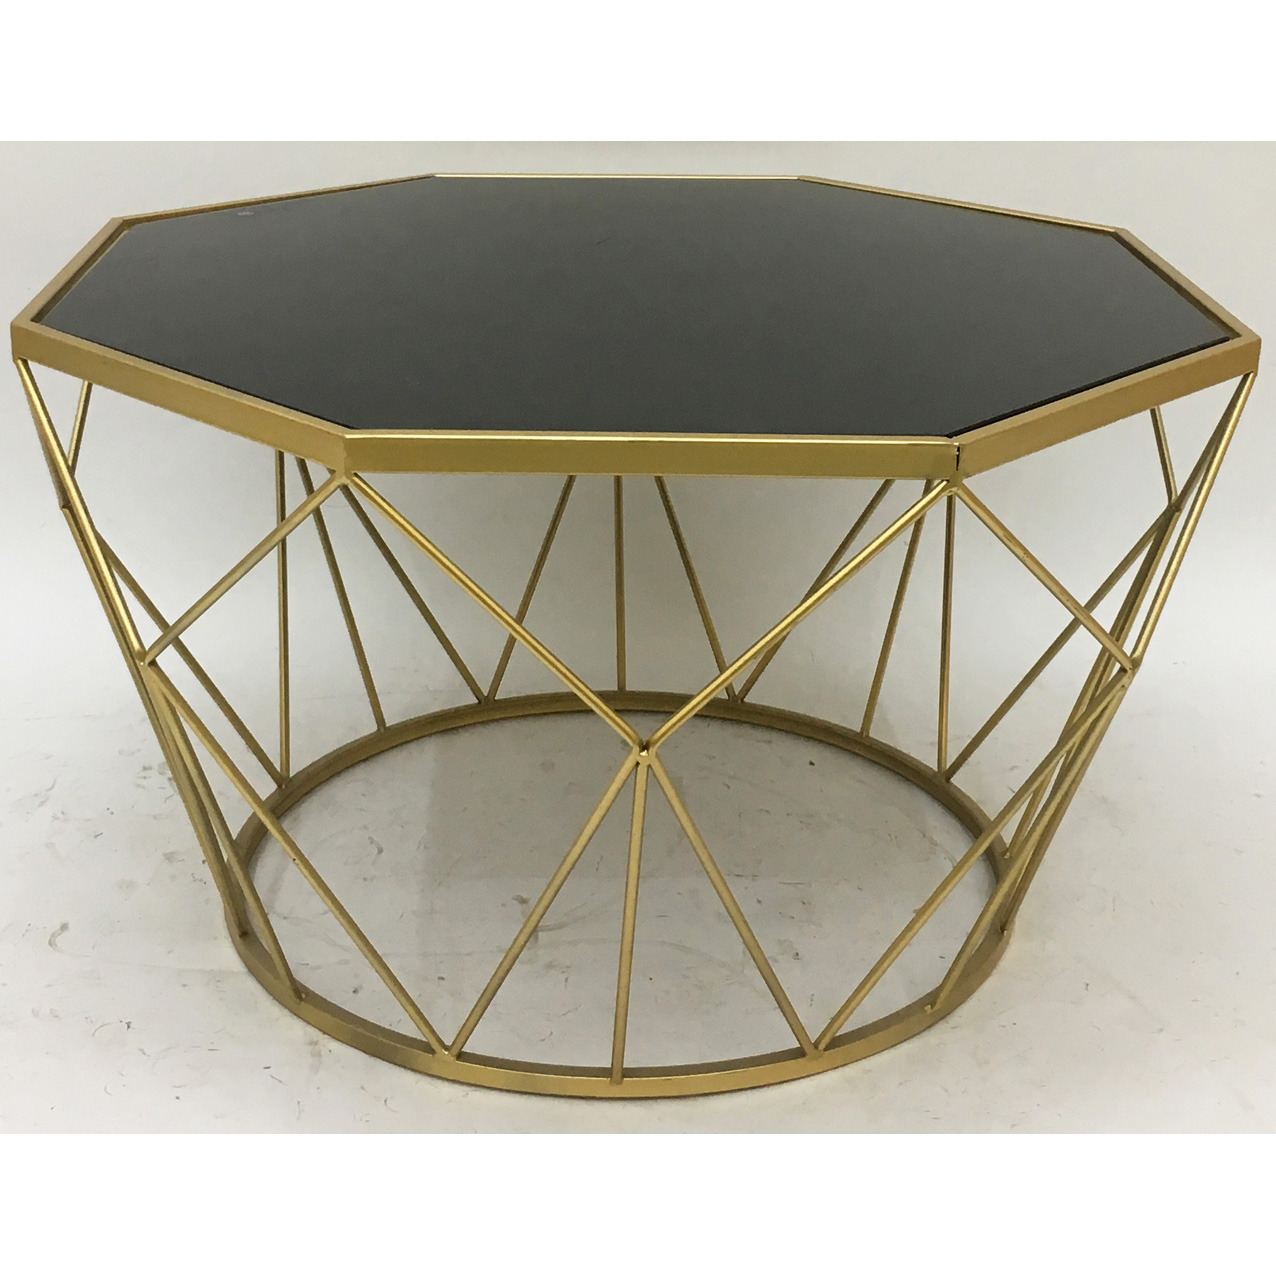 Gold octagonal metal coffee table with clear glass top and X metal side